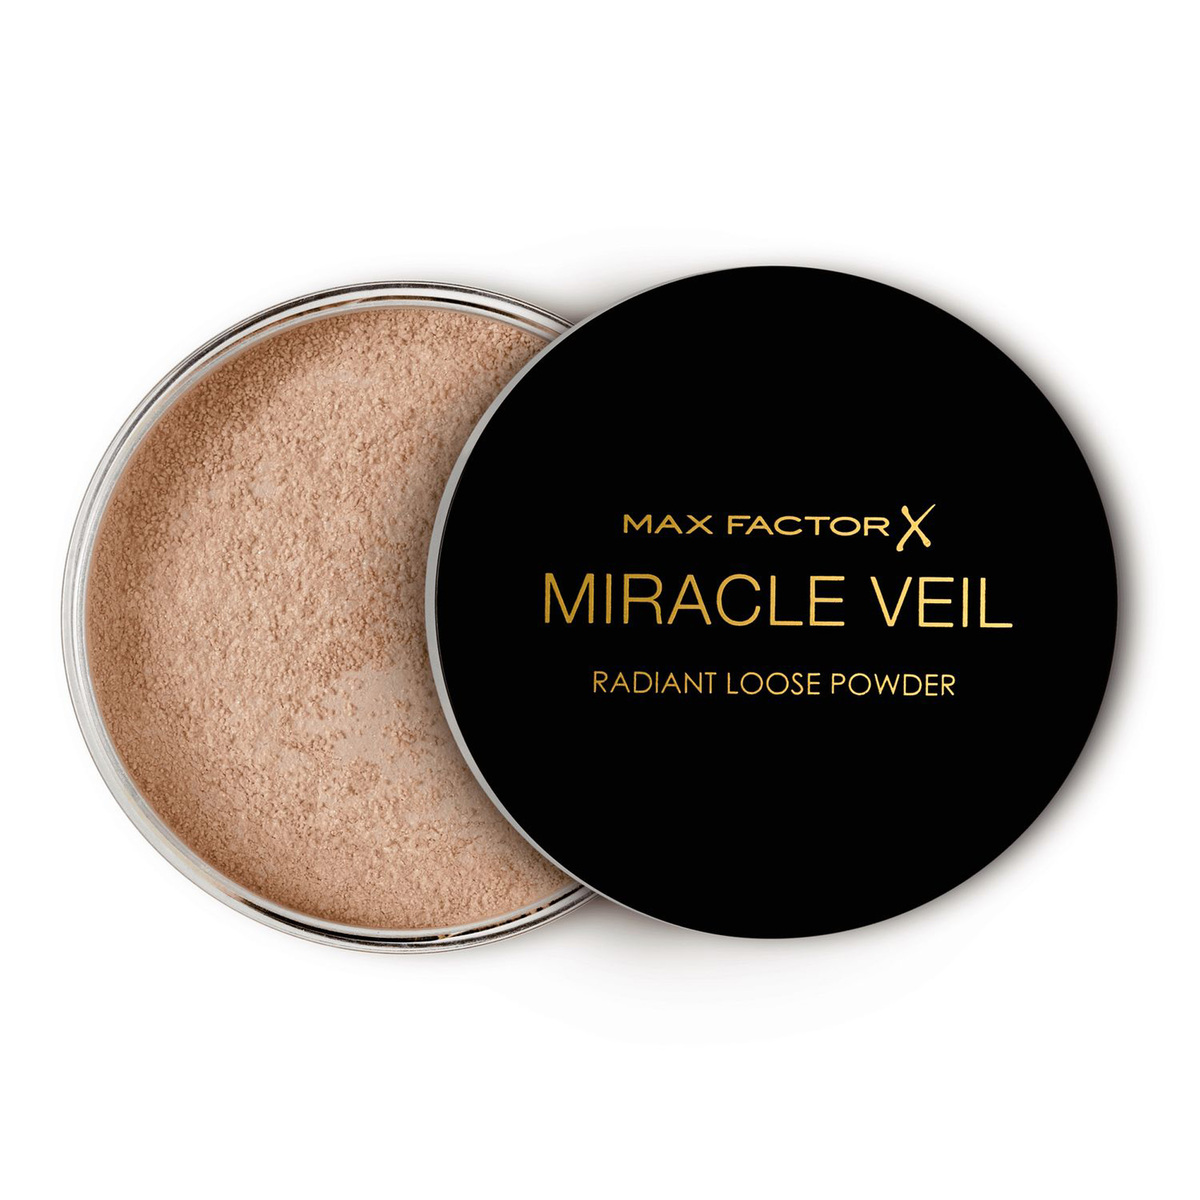 Max Factor Miracle Viel Radiant Loose Powder Translucent 4 g